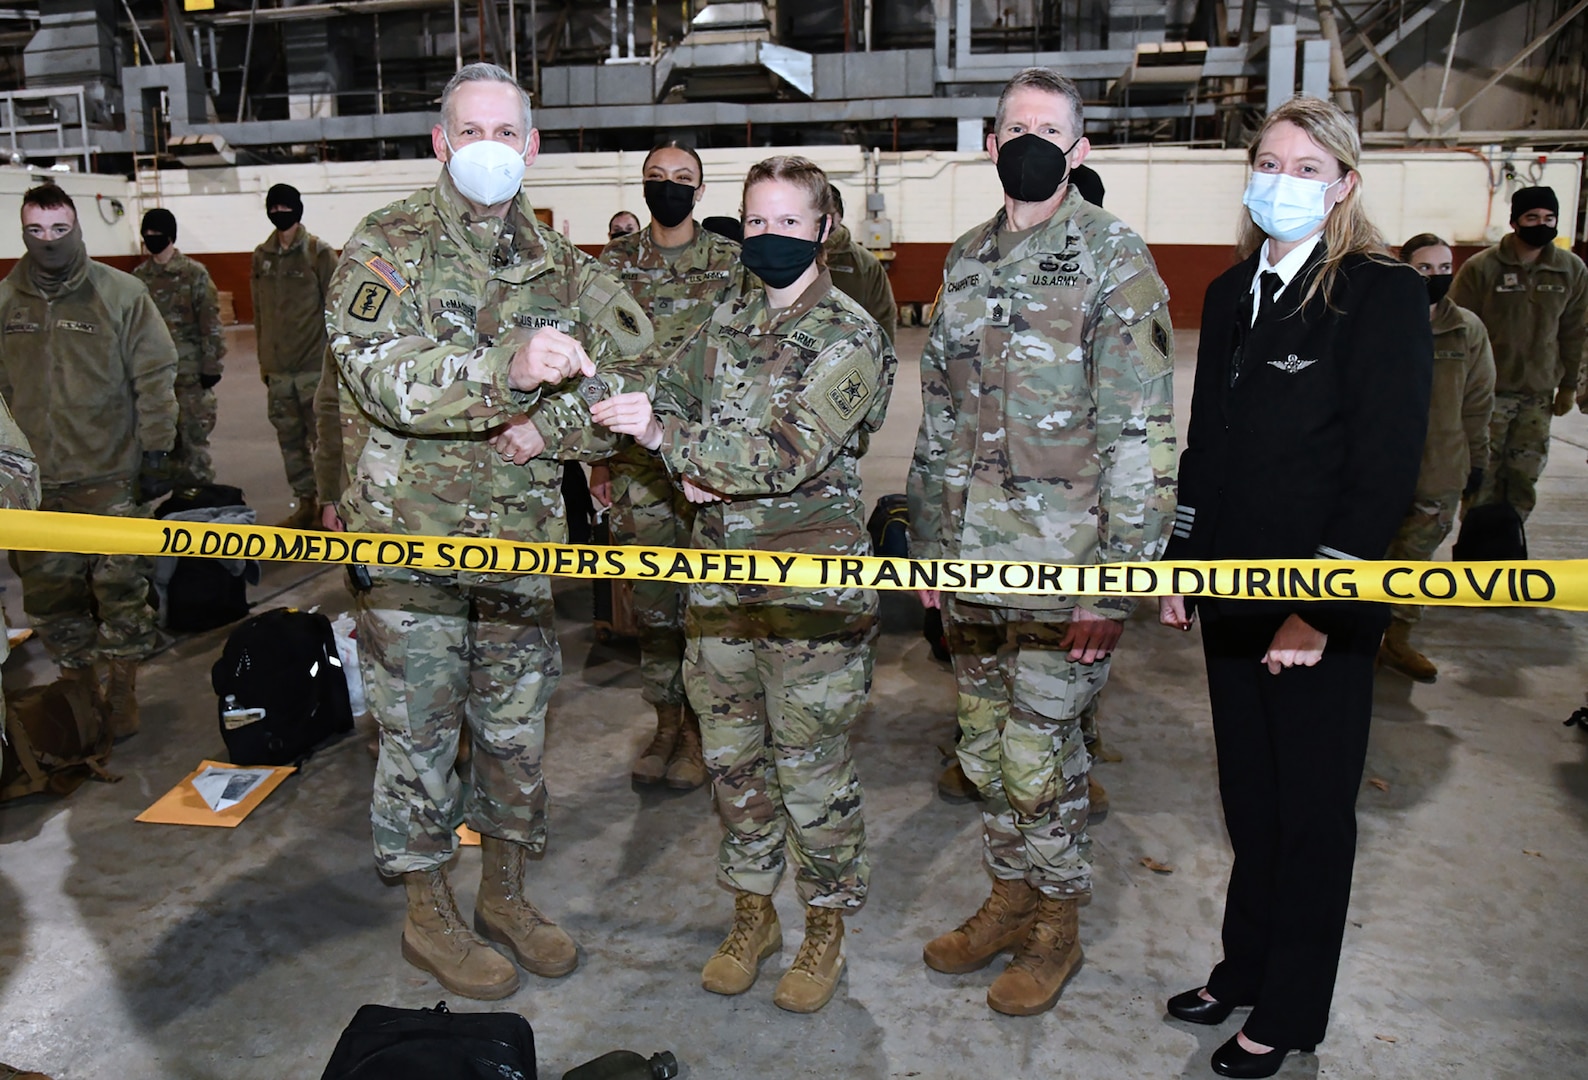 Maj. Gen. Dennis LeMaster, U.S. Army Medical Center of Excellence commanding general, presents a coin to Spc. Angela Thresher, a 68W Combat Medic from Washington State who was identified as the 10,000th Soldier to depart from MEDCoE in a controlled manner as part of the COVID-19 pandemic. She departs Joint Base San Antonio-Fort Sam Houston for her follow-on duty assignment at Tripler Army Medical Center, Hawaii. Also pictured is MEDCoE Command Sgt. Maj. Clark Charpentier.